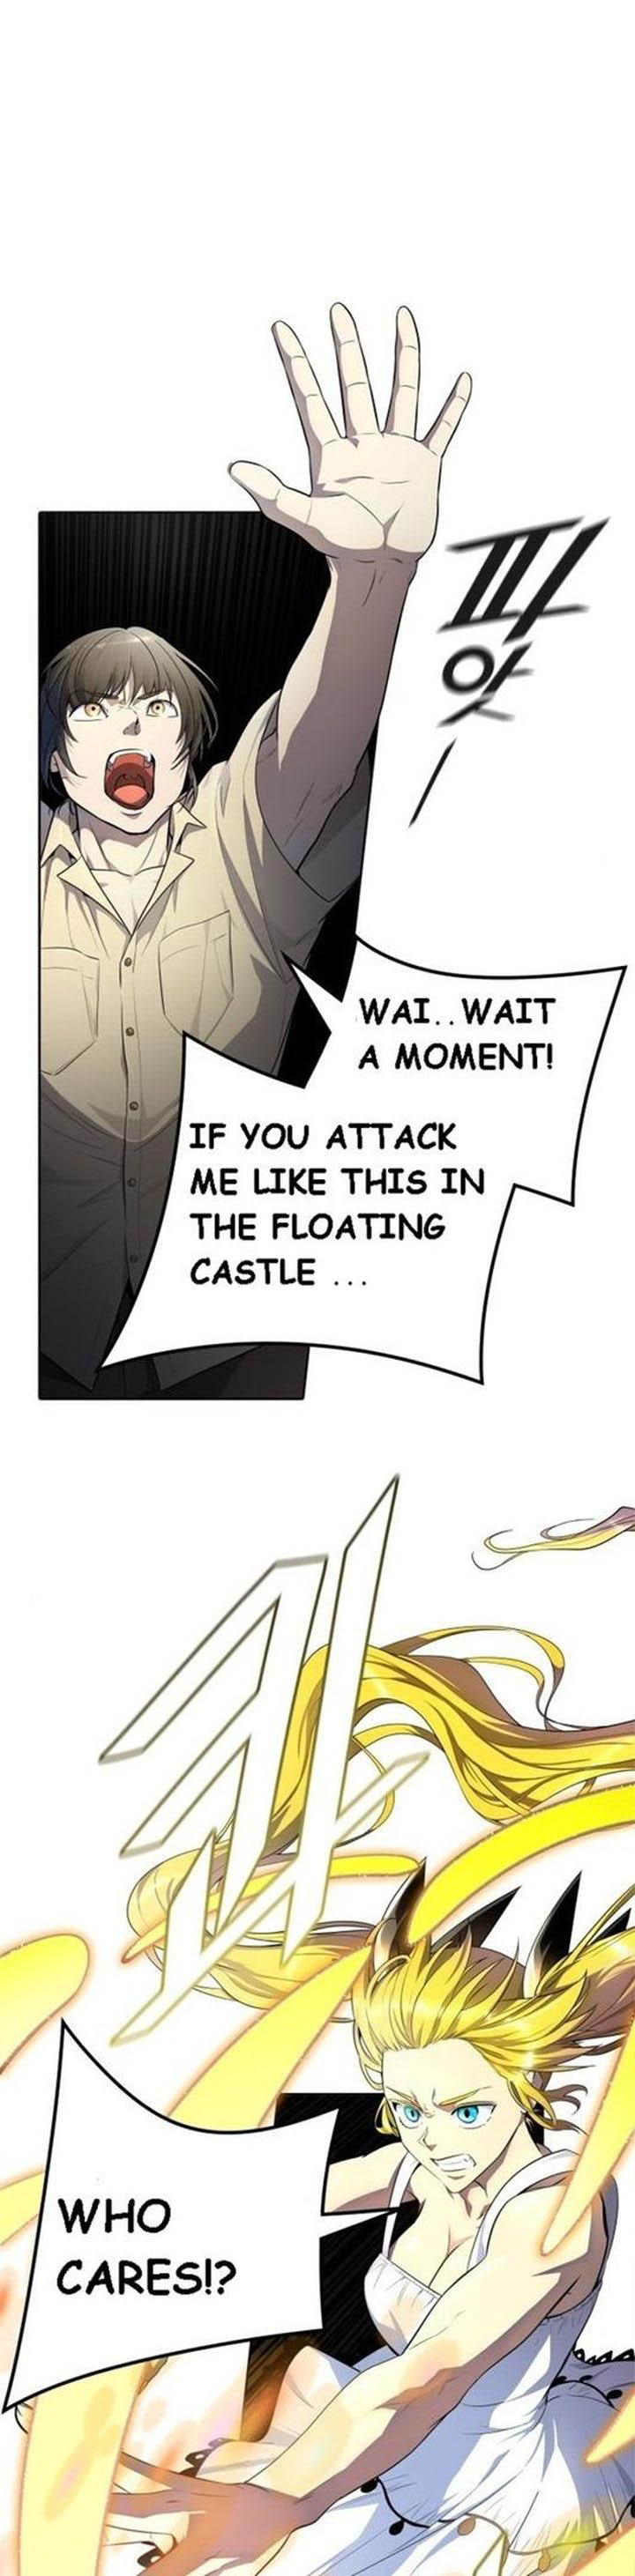 Tower Of God Chapter 548 Page 13